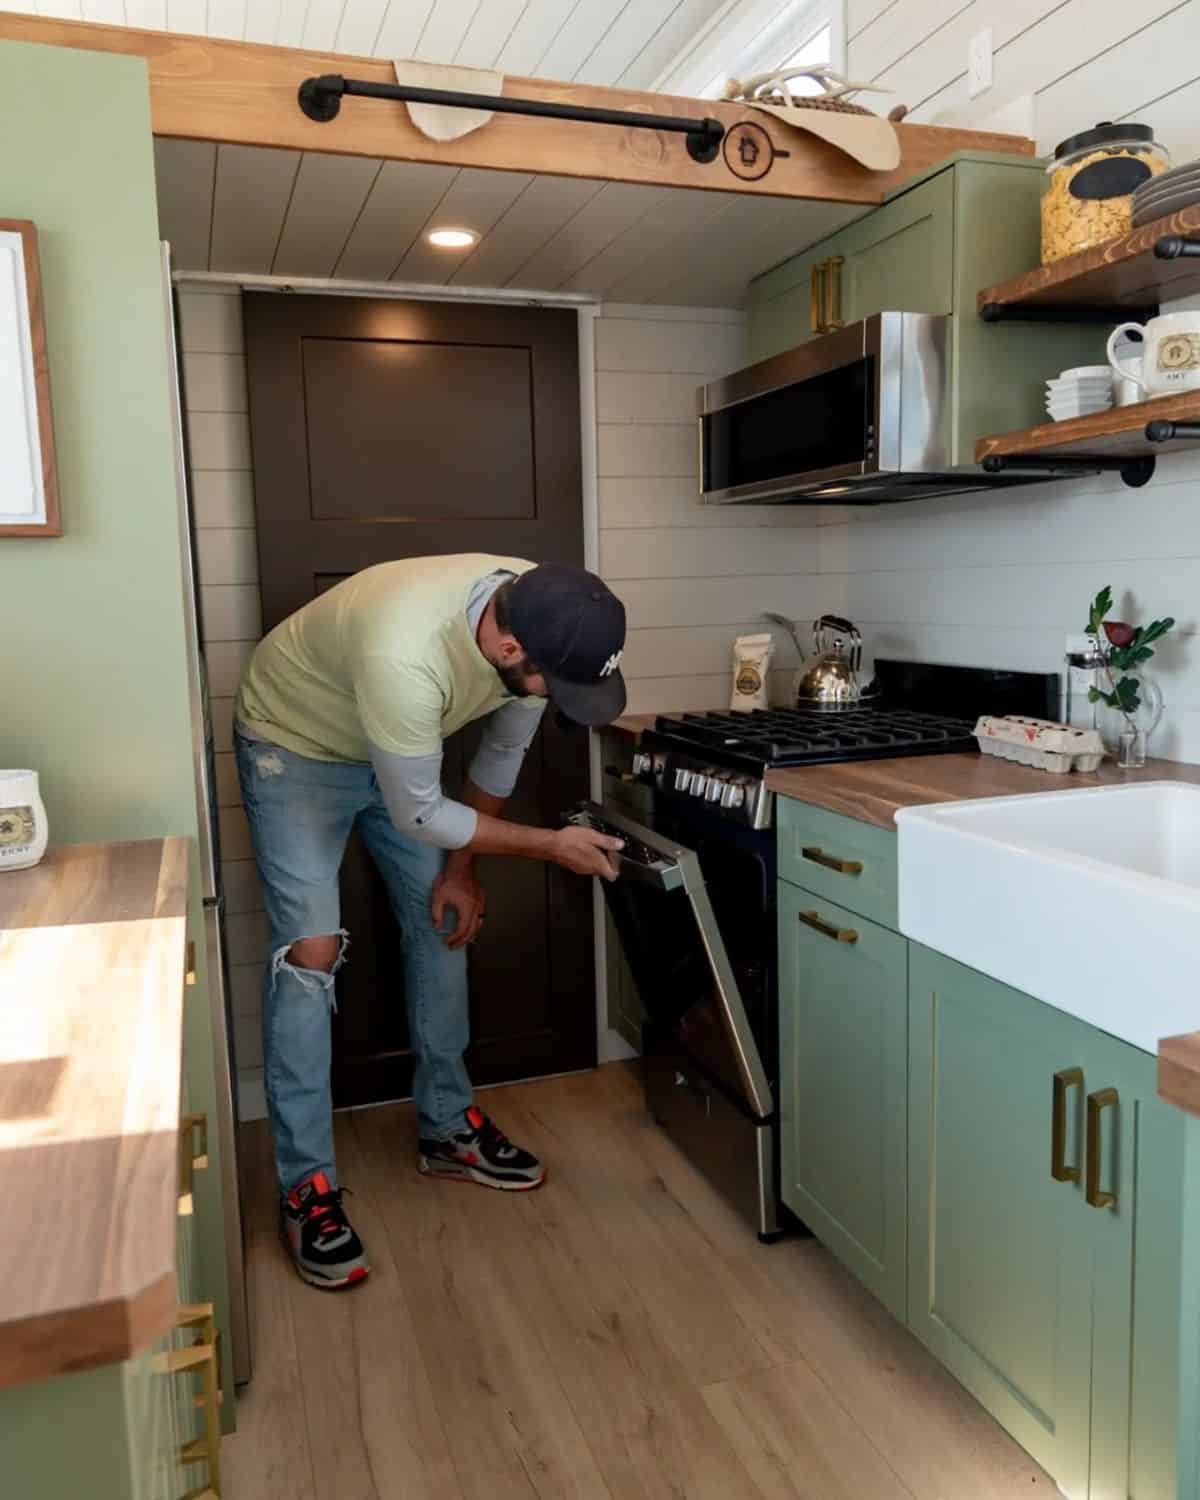 Kitchen area of Teacup Tiny Home  is stunning